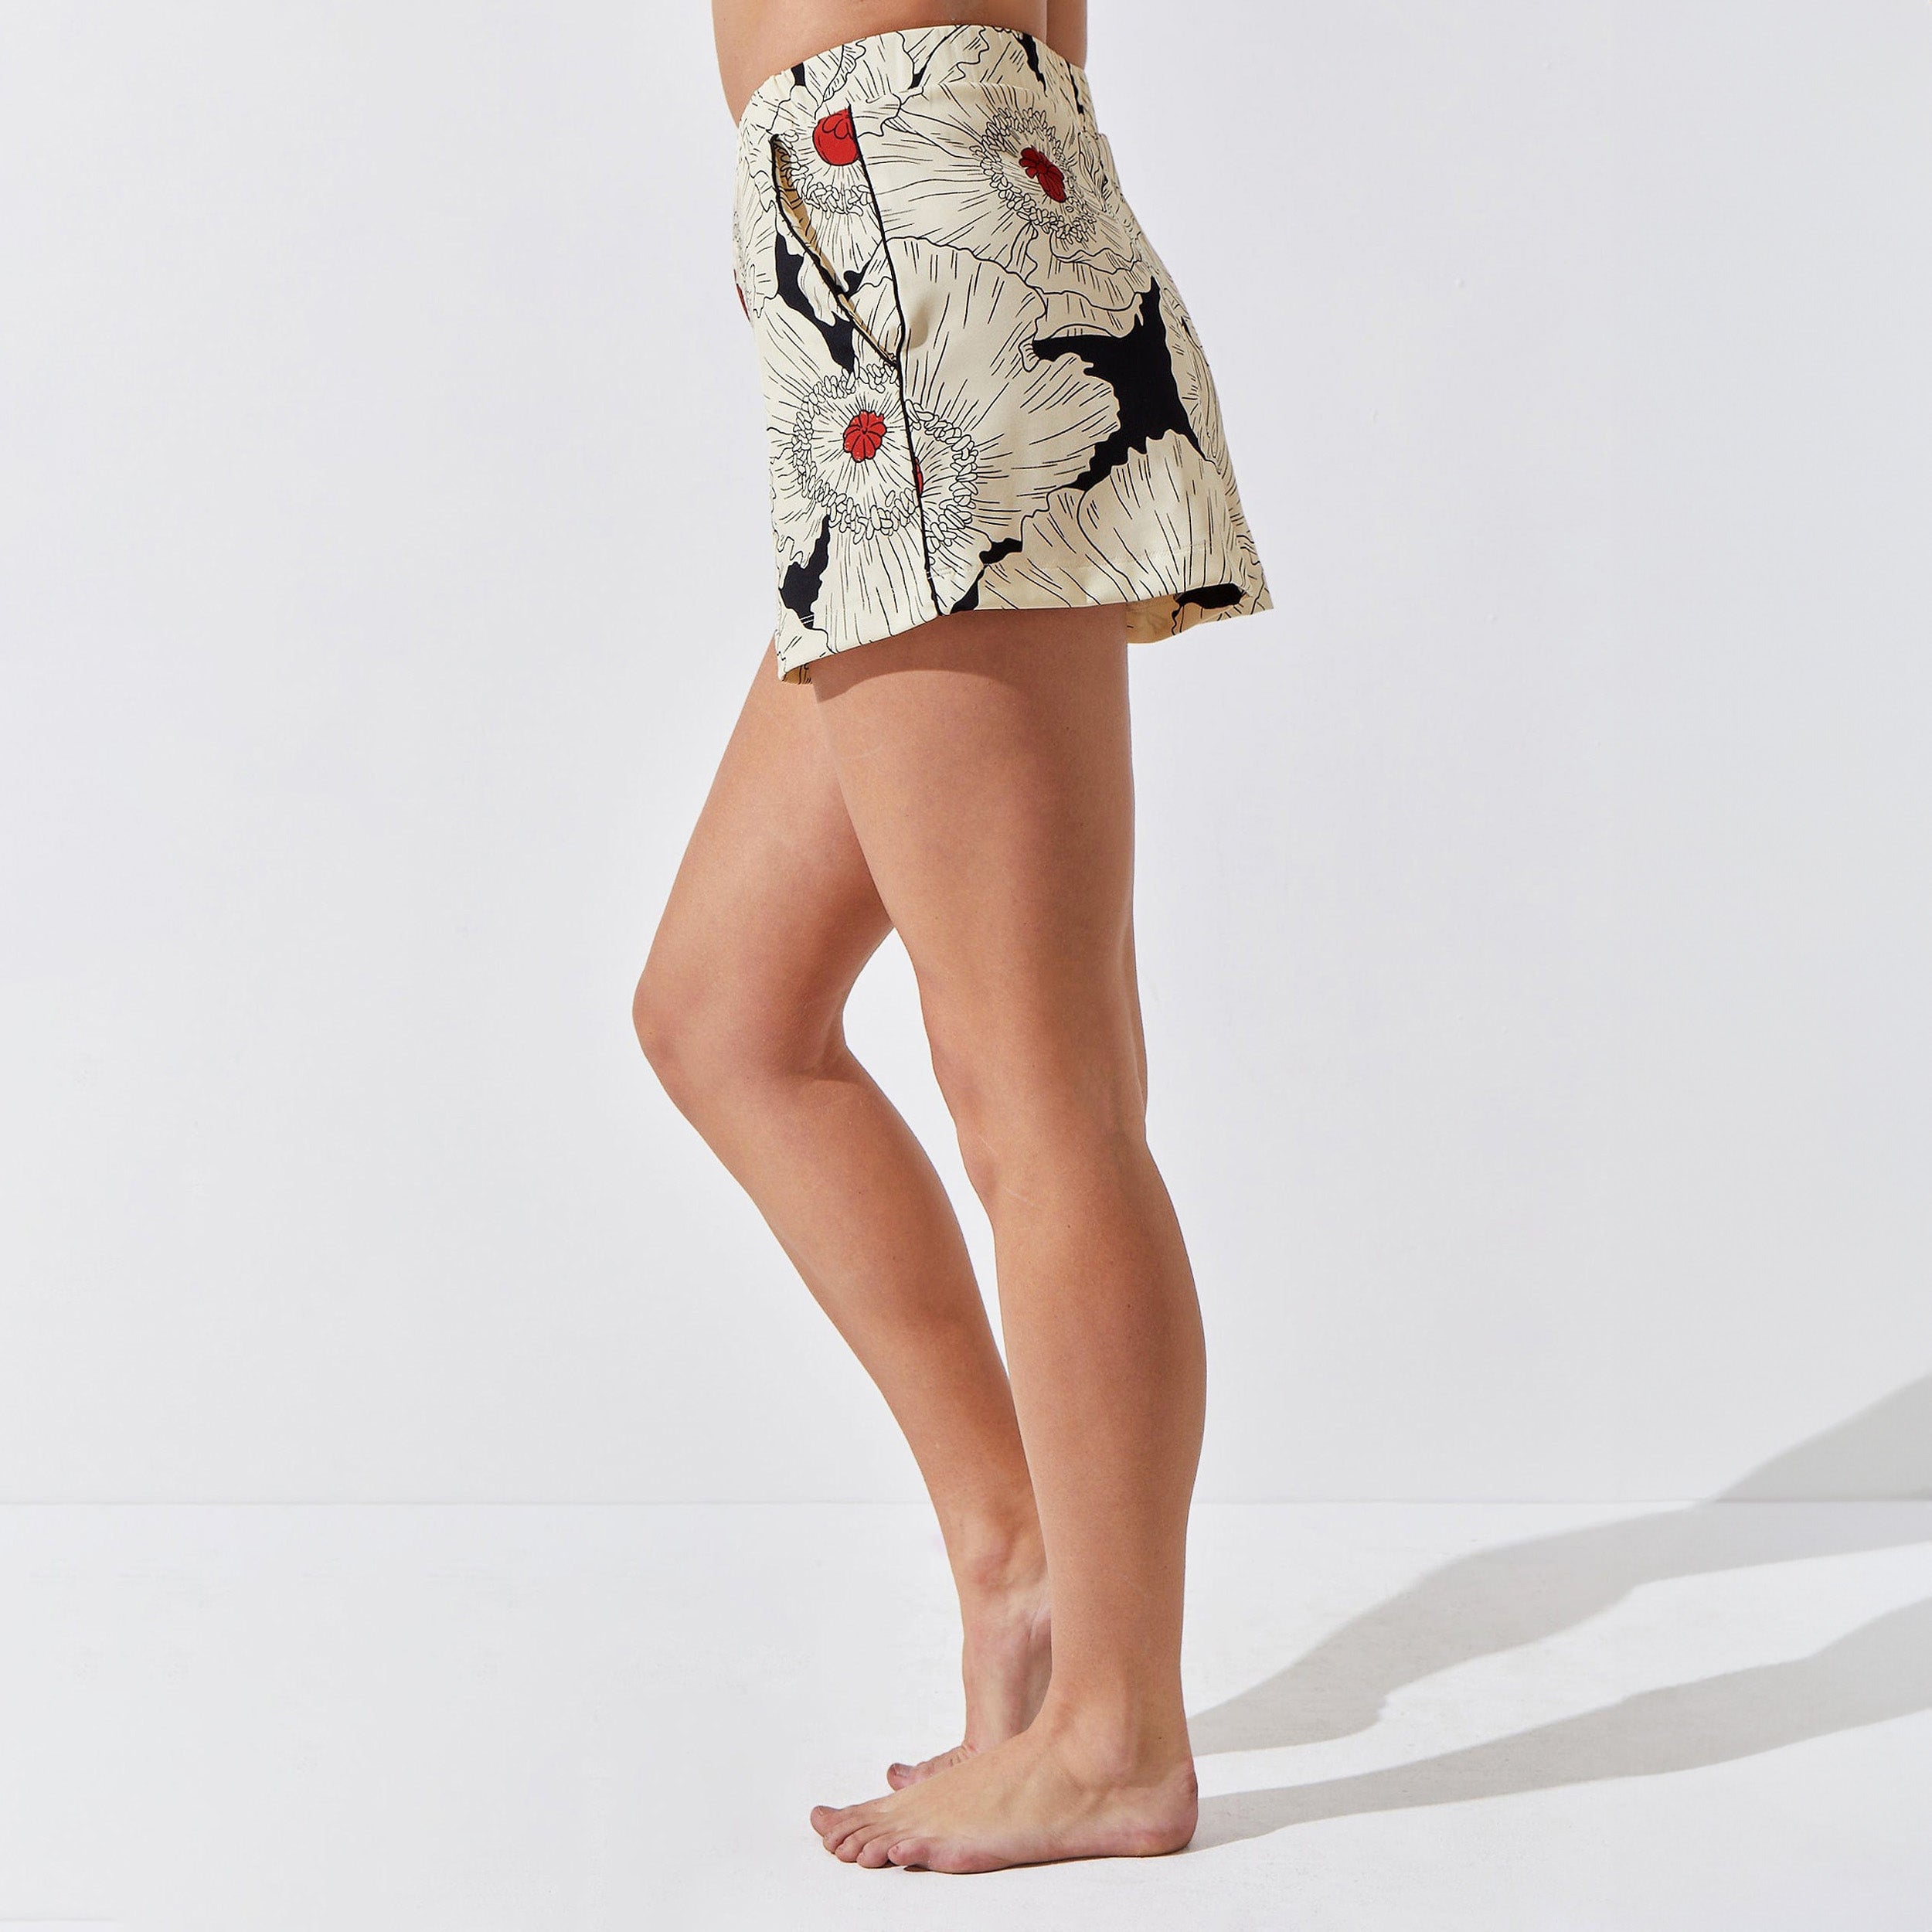 Side view of woman wearing breathable, relaxed and butter smooth pajama short featuring a high-waist cut, side pockets and stunning Poppy floral print